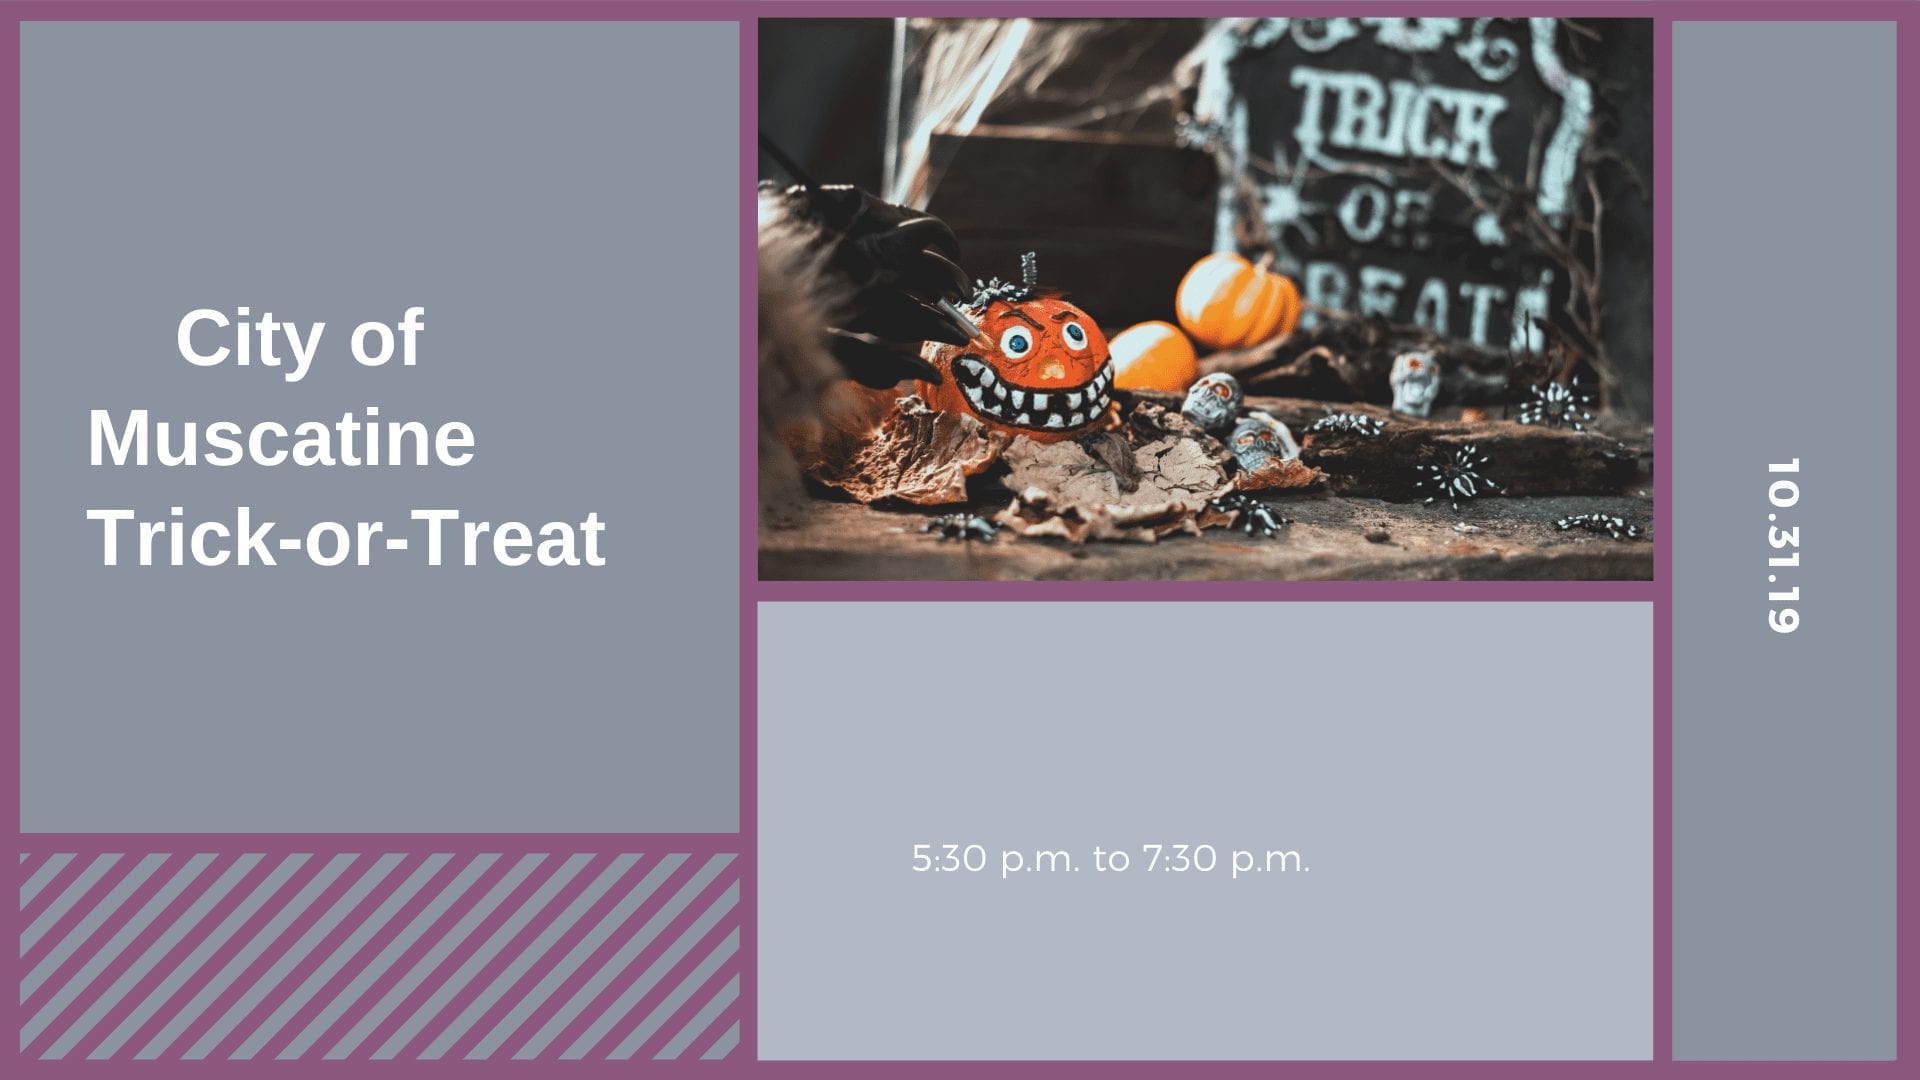 City of Muscatine Trick-or-Treat